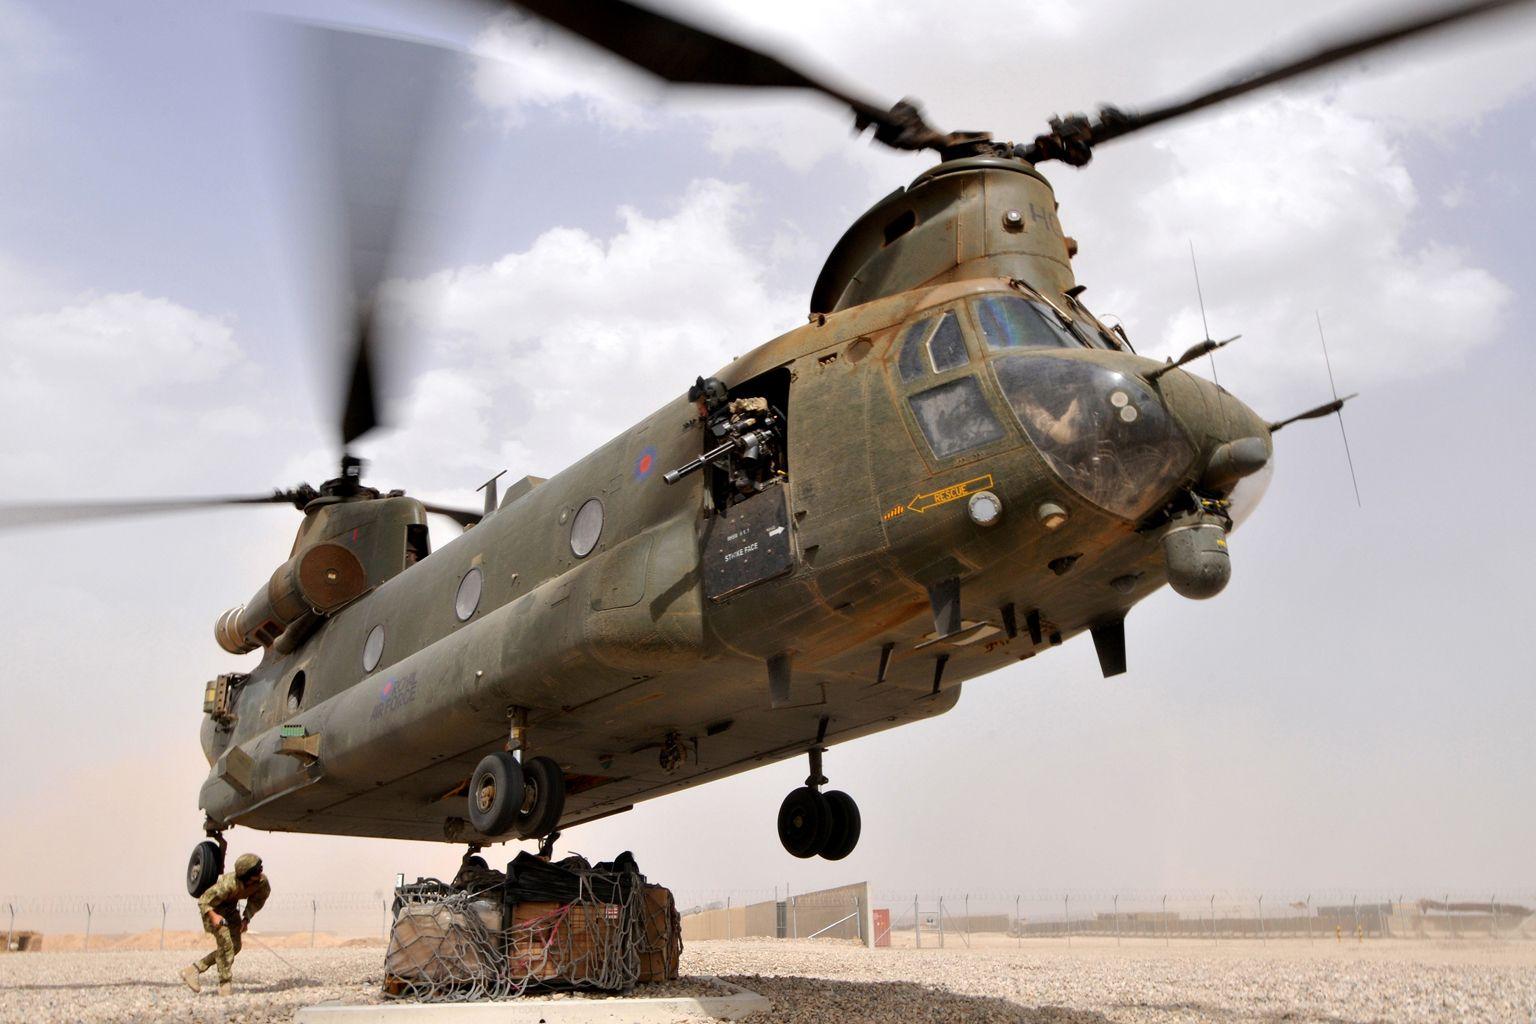 Chinook Helicopter Picks Up Supplies to Deliver to Frontline